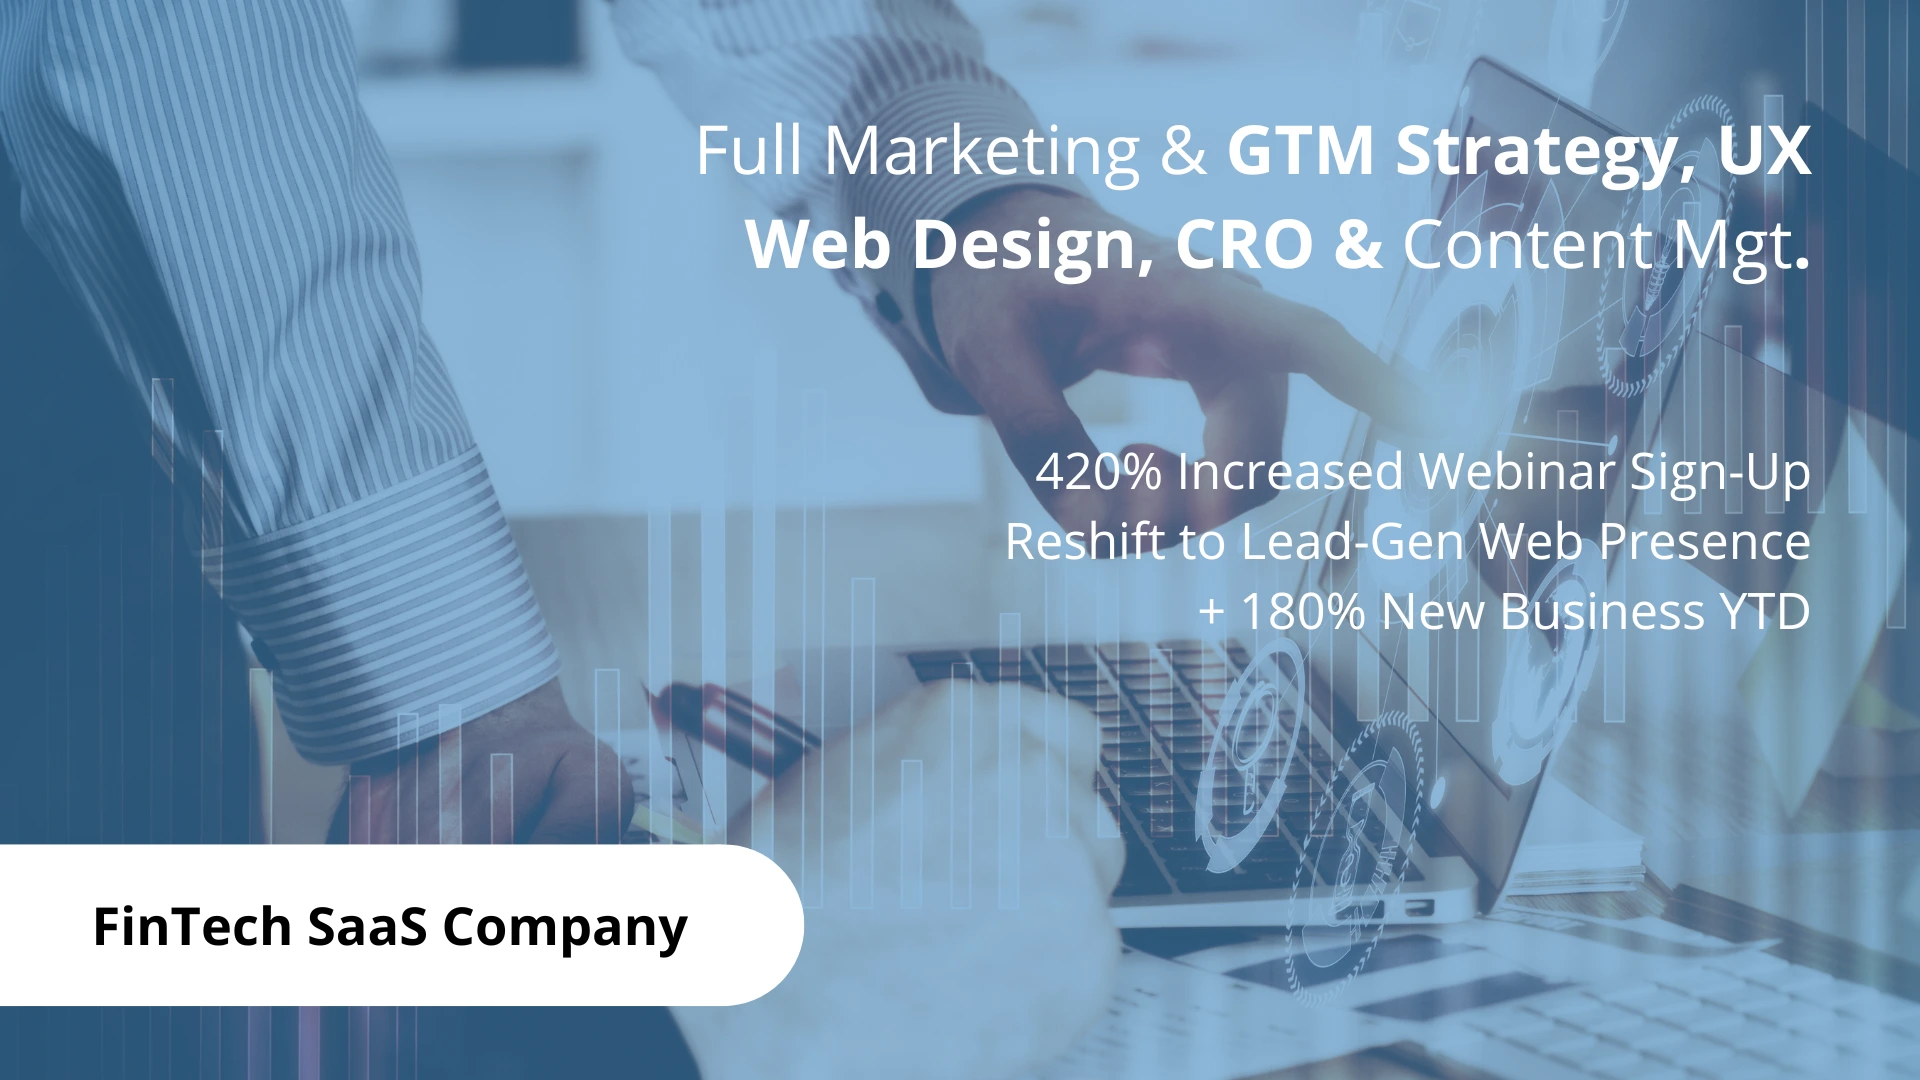 Full Marketing & GTM Strategy, UX Web Design, CRO & Content Mgt.